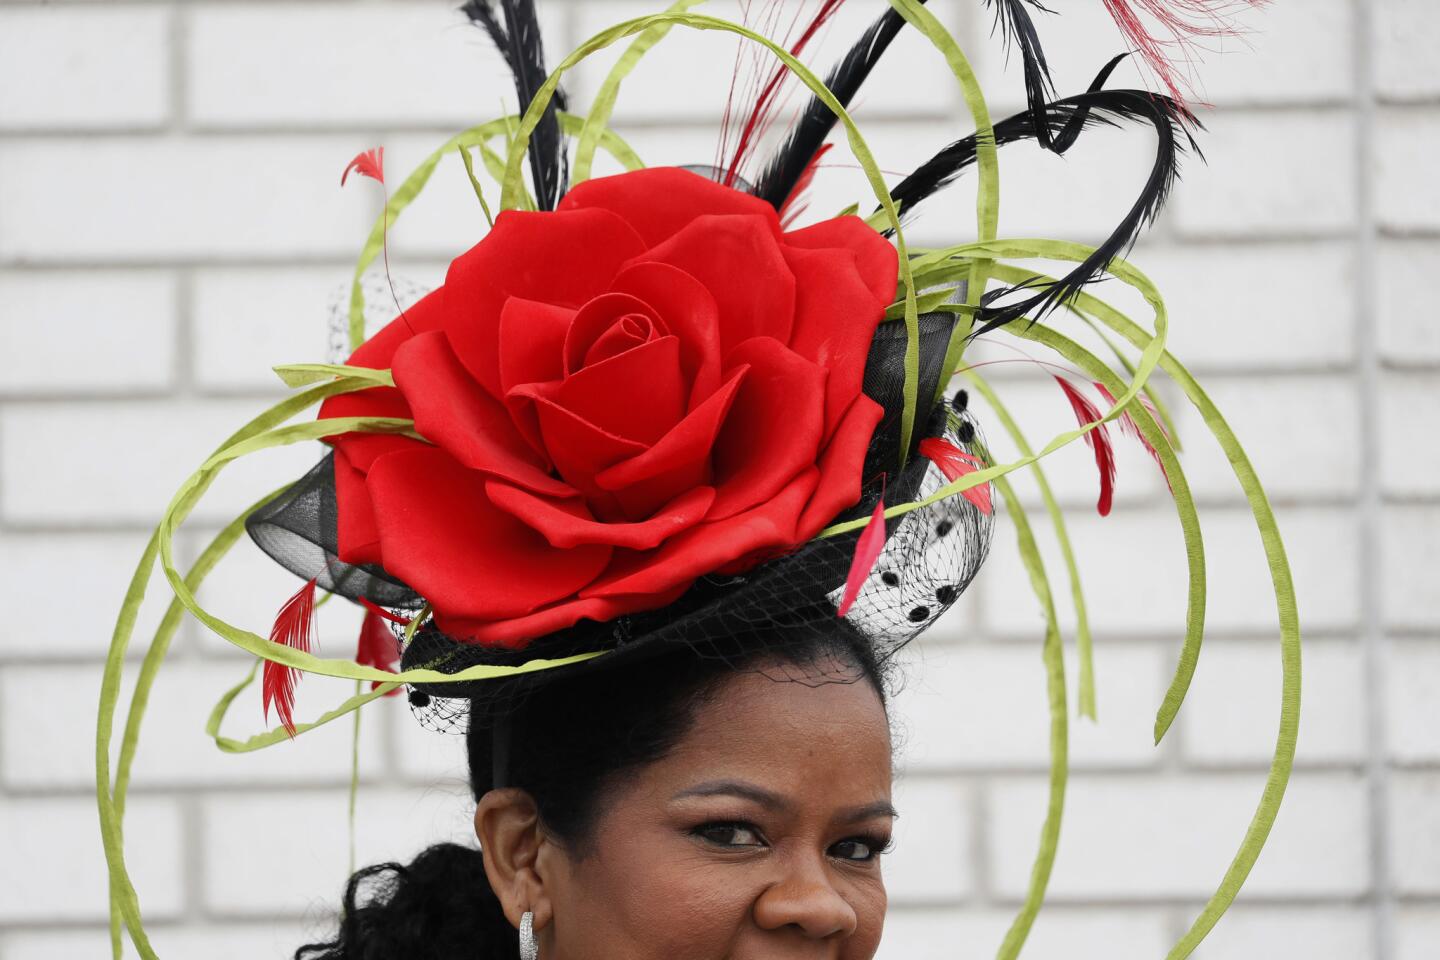 A woman wears a hat during the 145th running of the Kentucky Derby horse race at Churchill Downs on May 4, 2019.